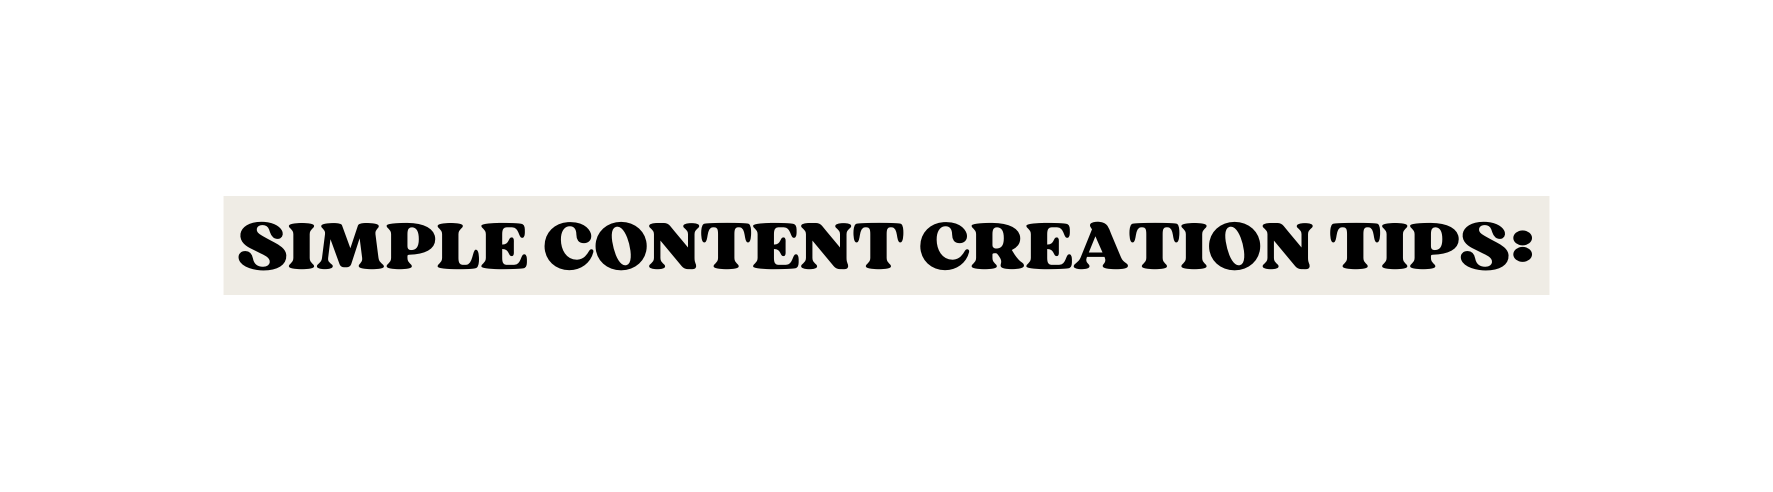 Simple Content Creation Tips